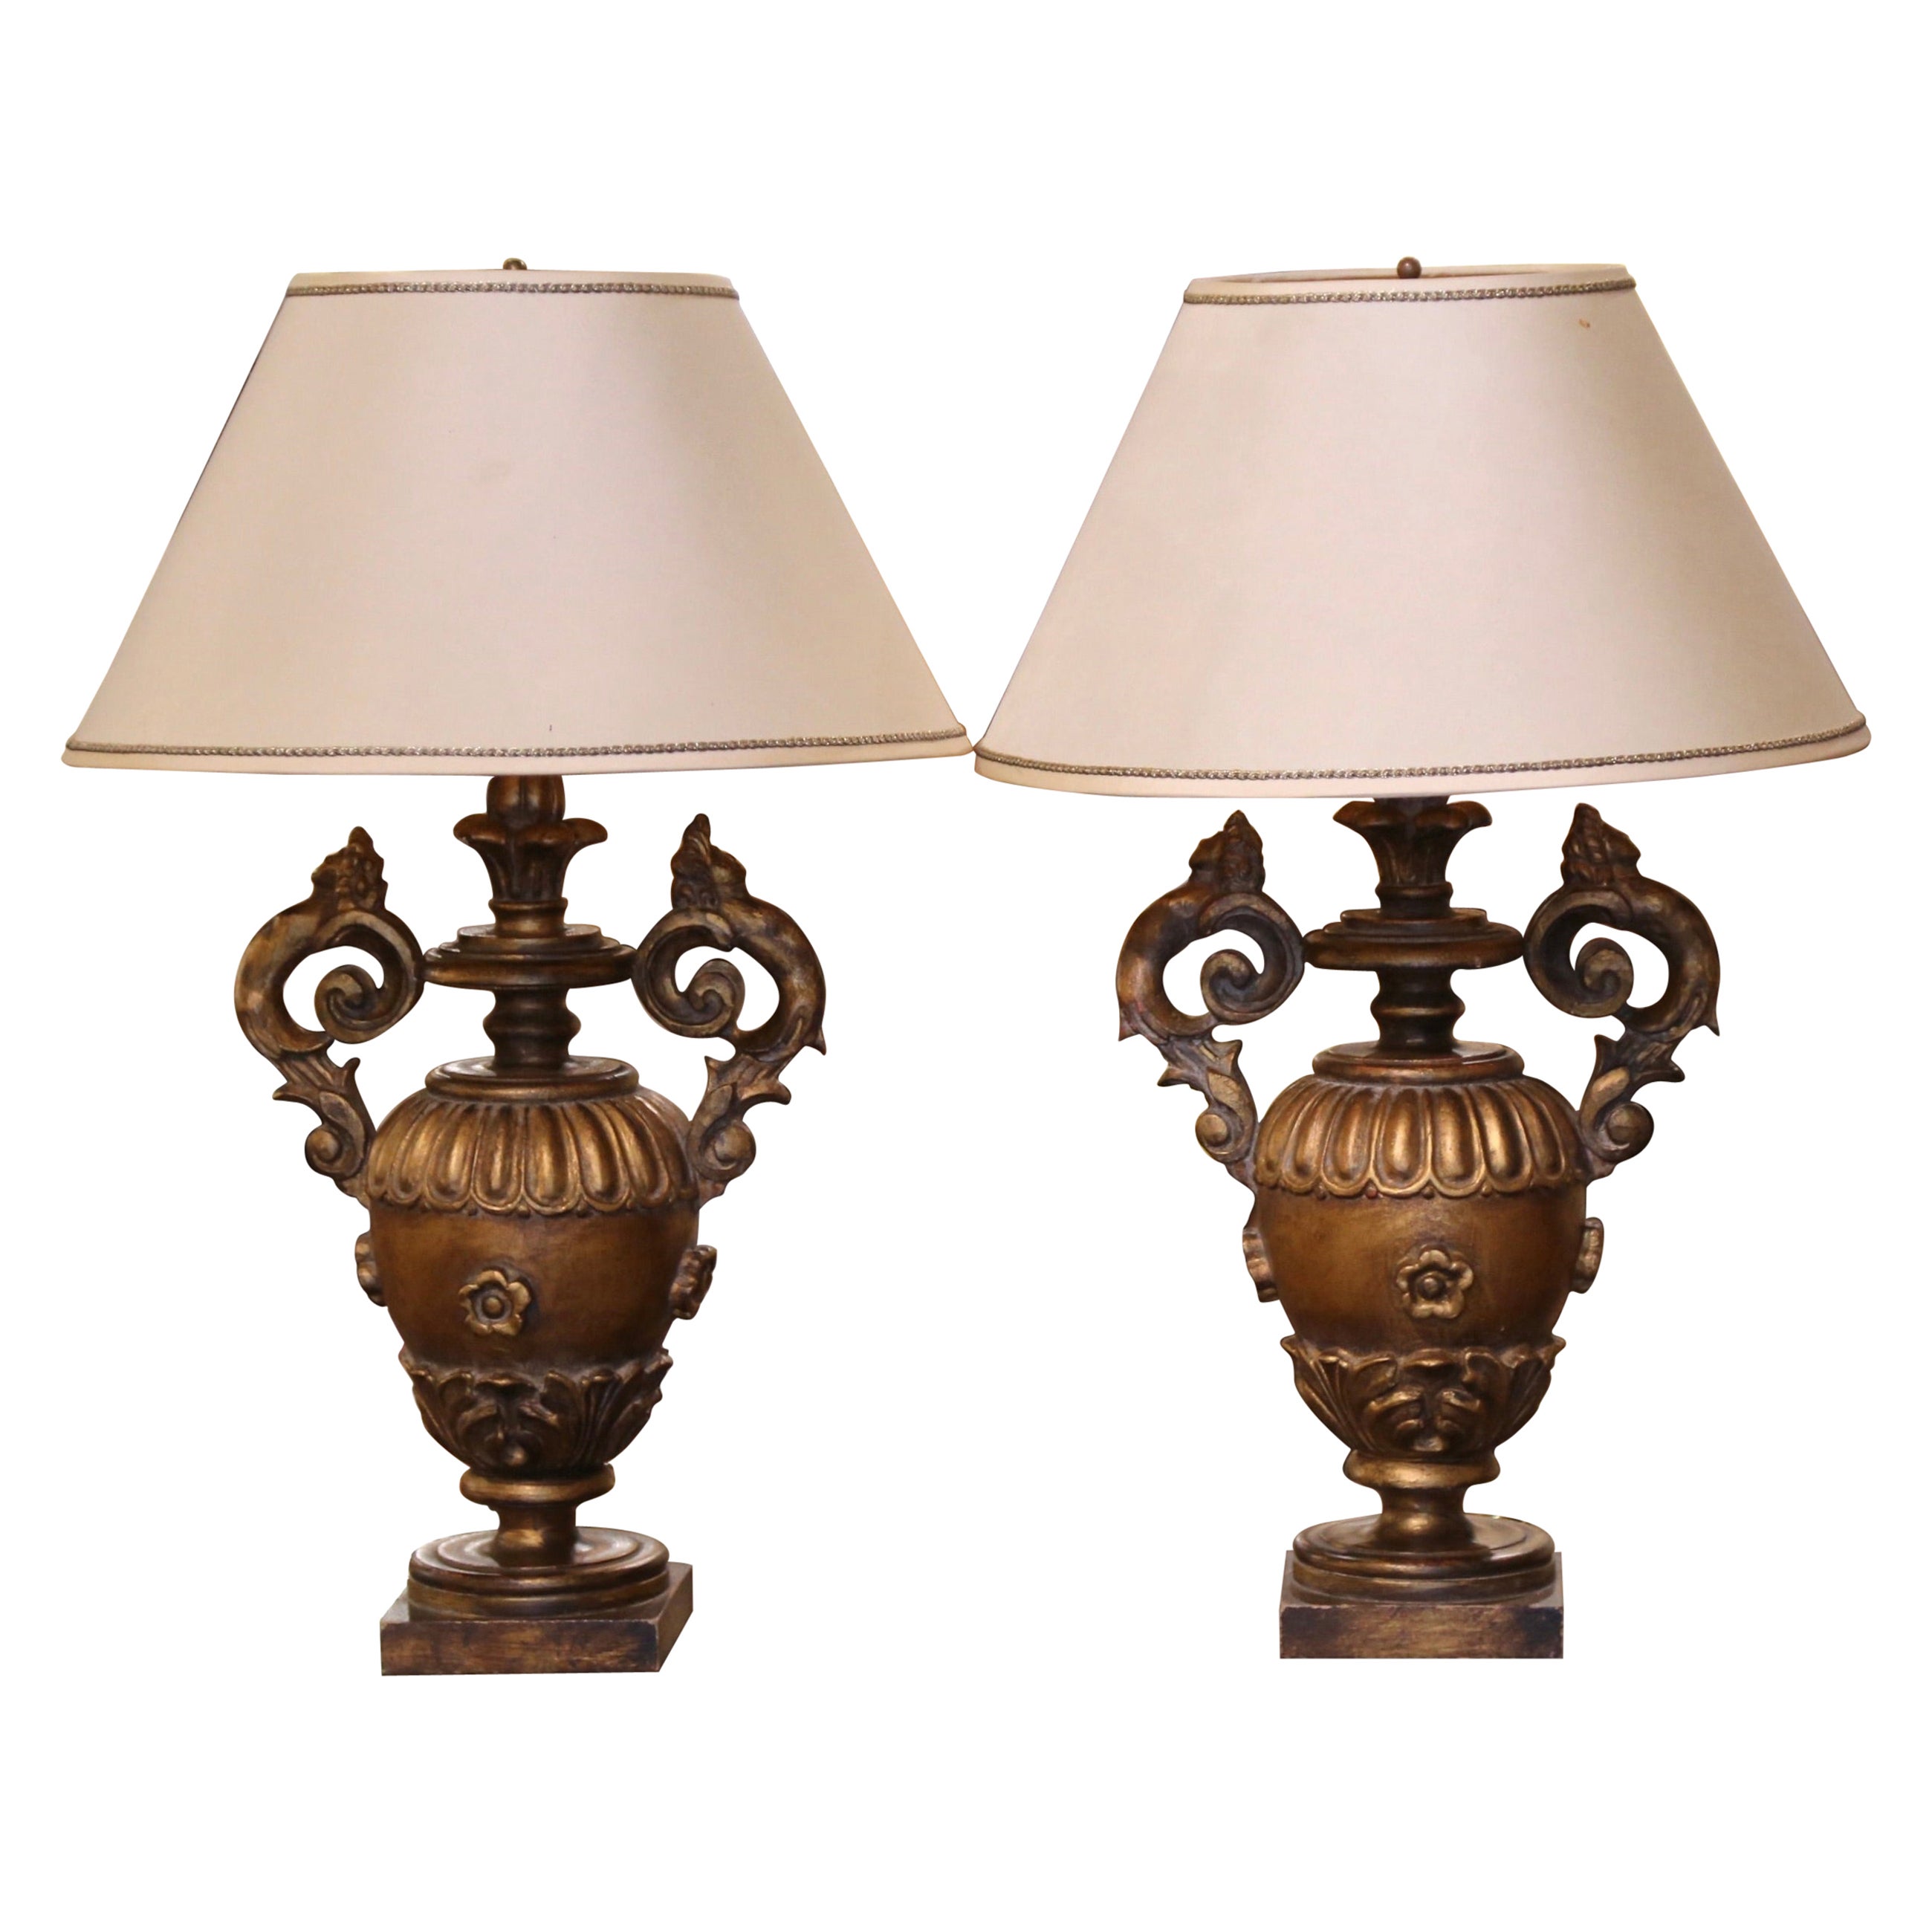 Pair of Mid-Century Italian Carved Painted and Gilt Table Lamps with Shades